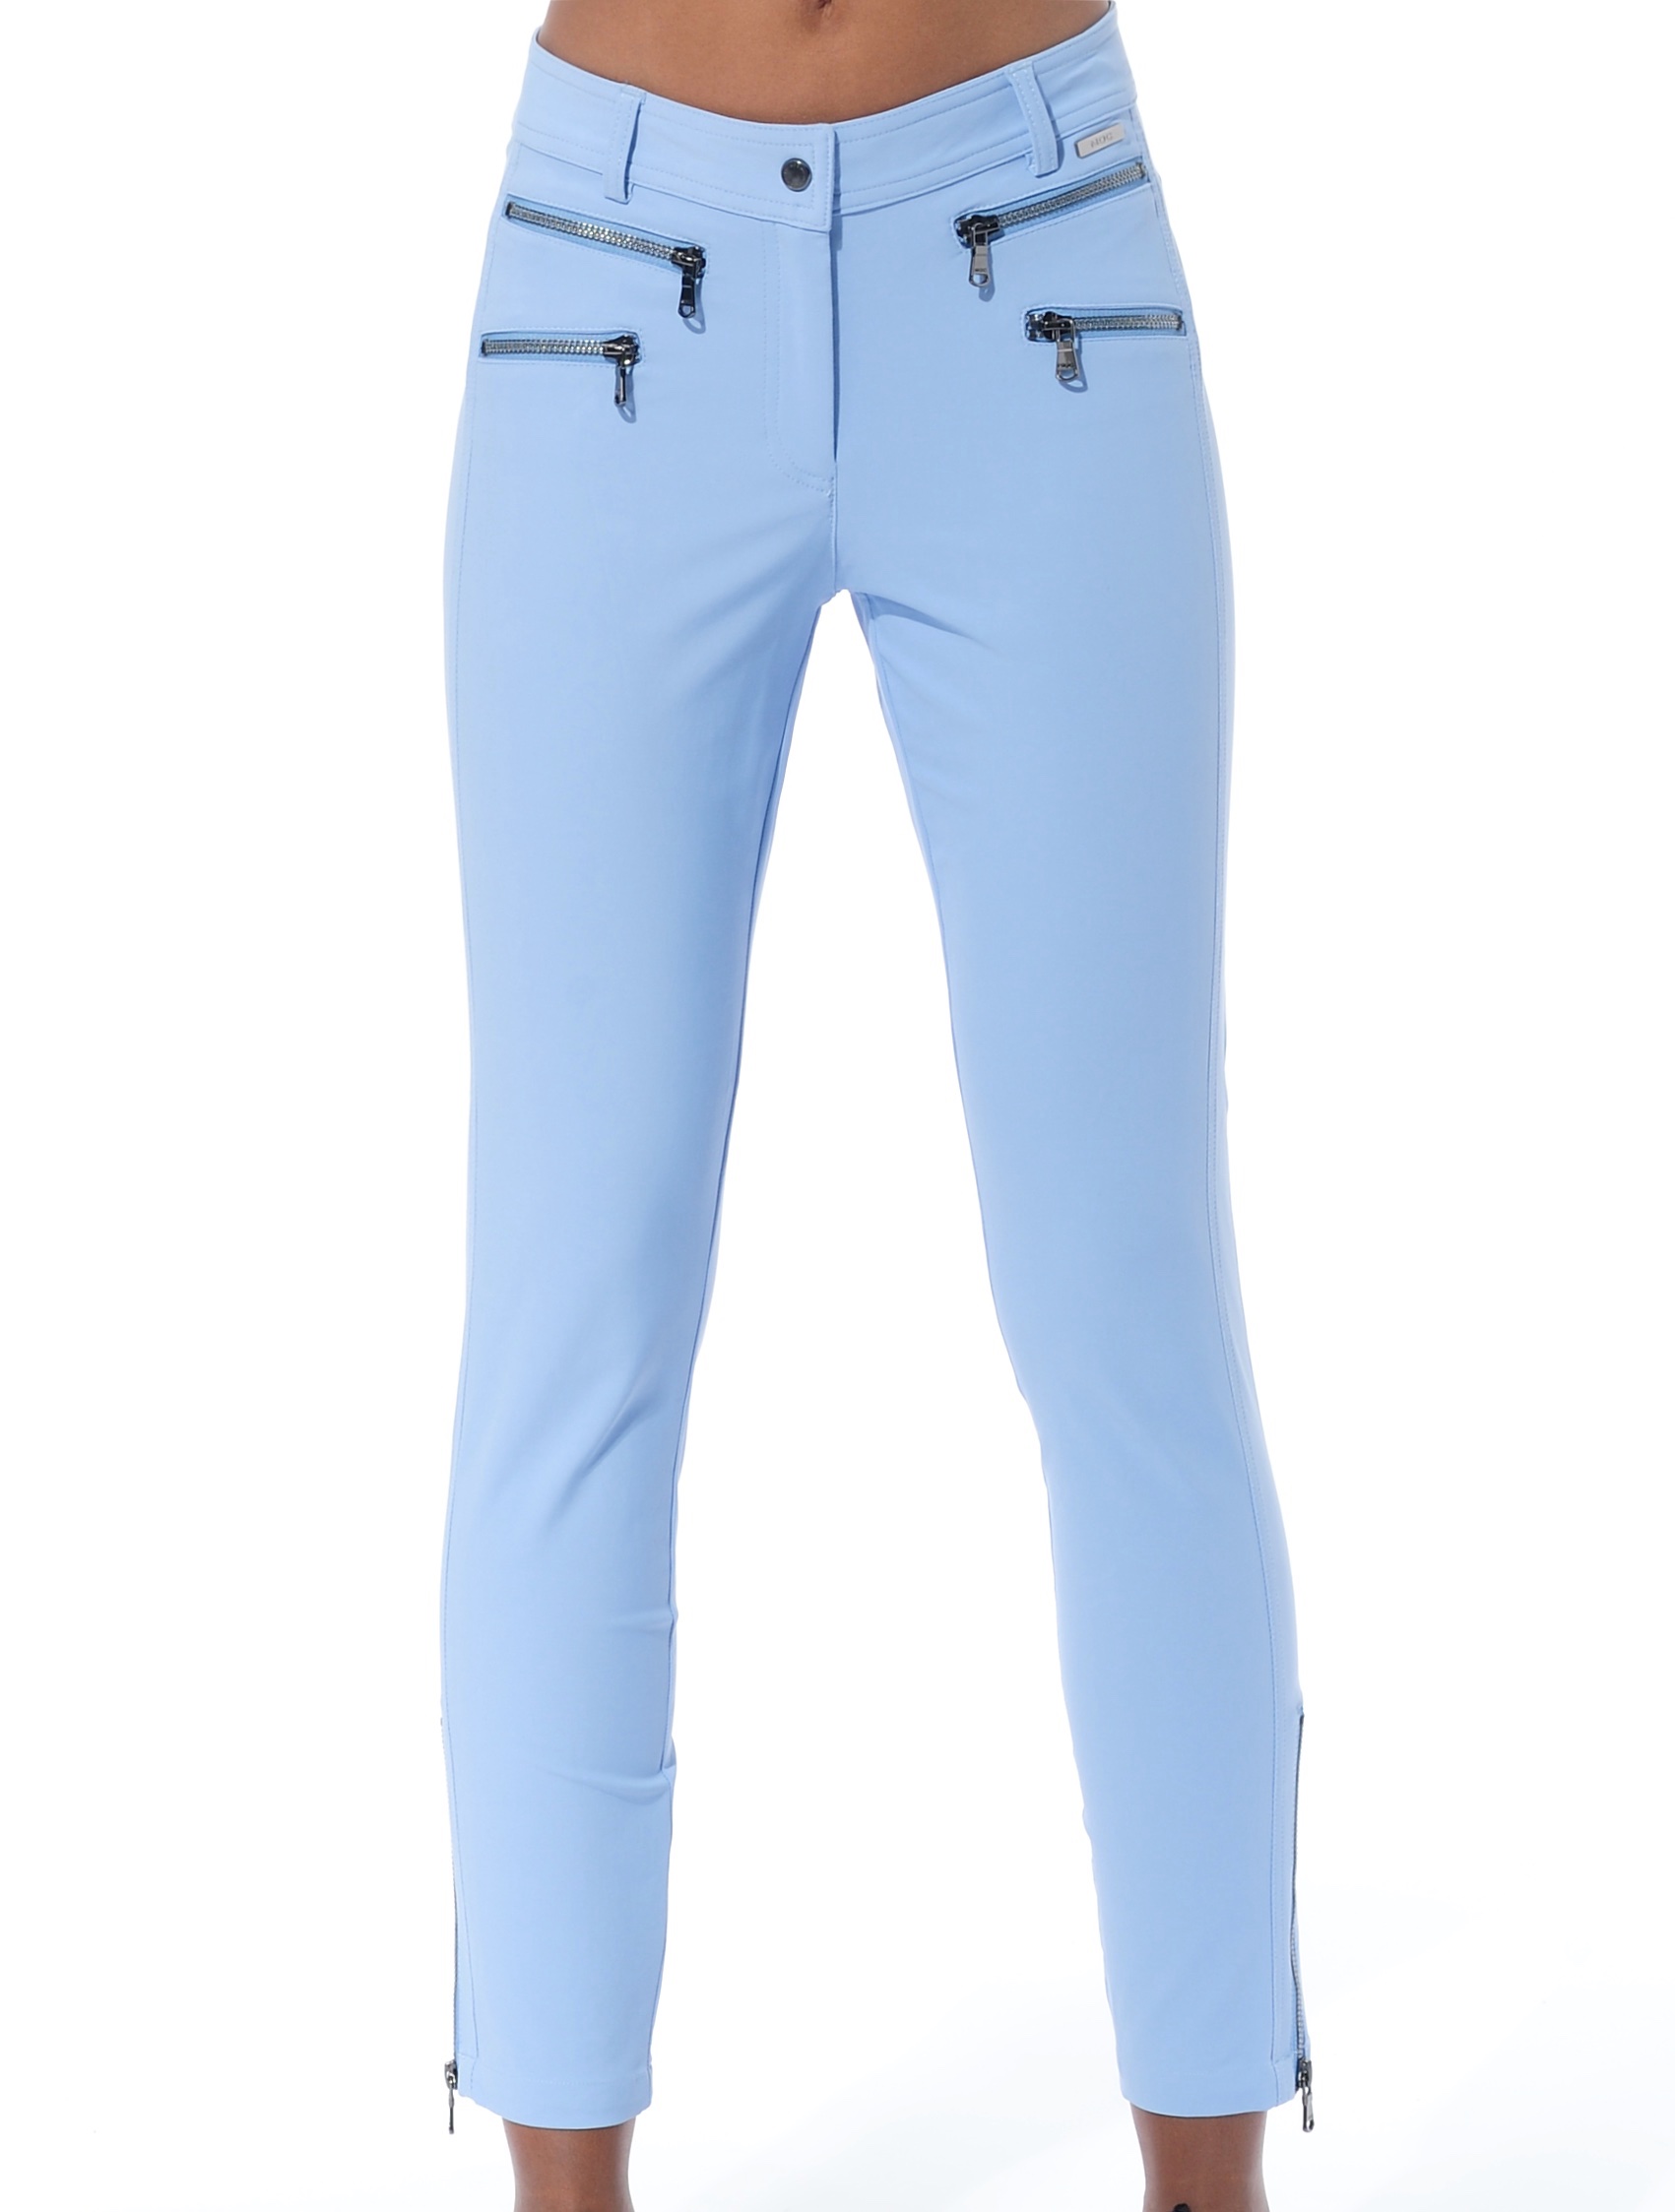 4way stretch double zip ankle pants baby blue 